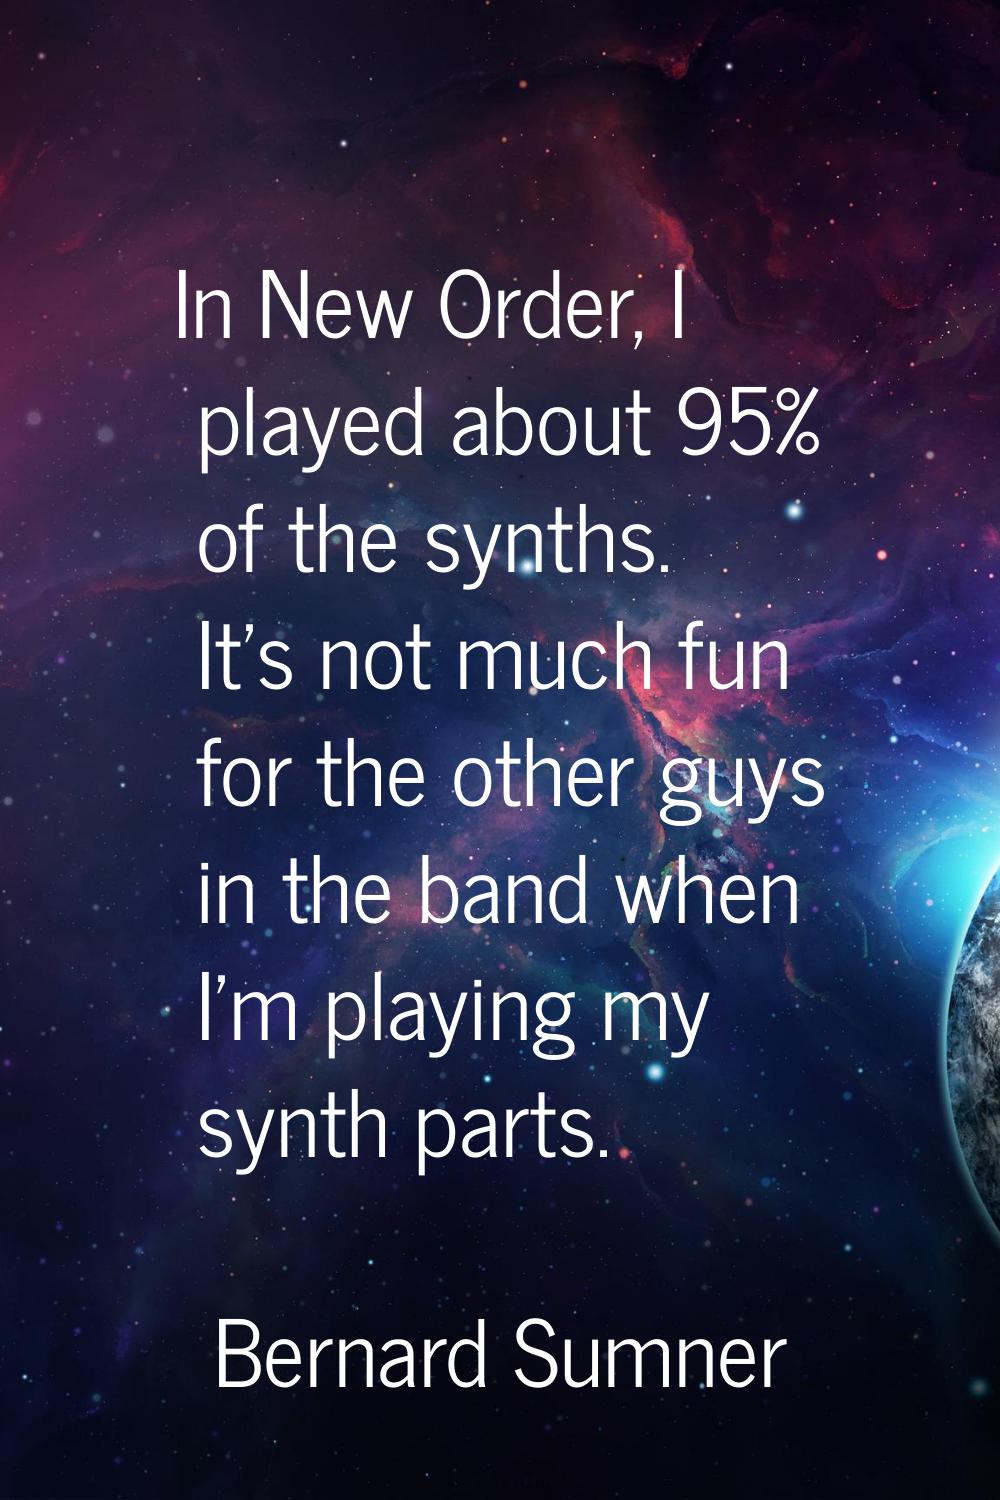 In New Order, I played about 95% of the synths. It's not much fun for the other guys in the band wh